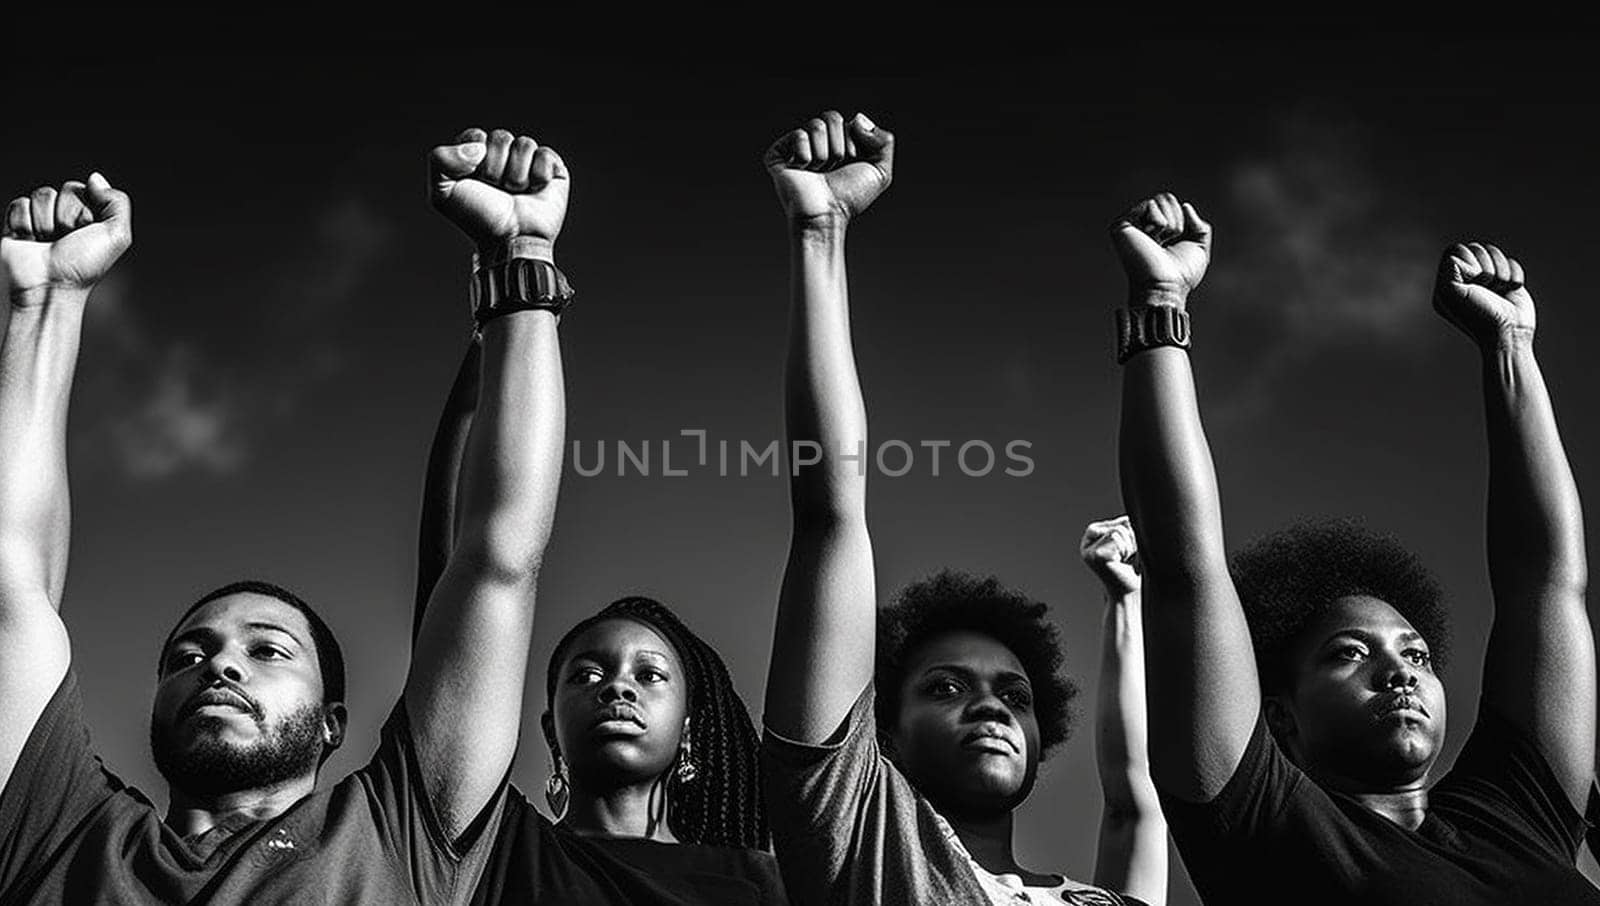 Black lives matter activist movement protesting against racism and fighting for equality Demonstrators from different cultures and race protest on street for justice and equal rights equality